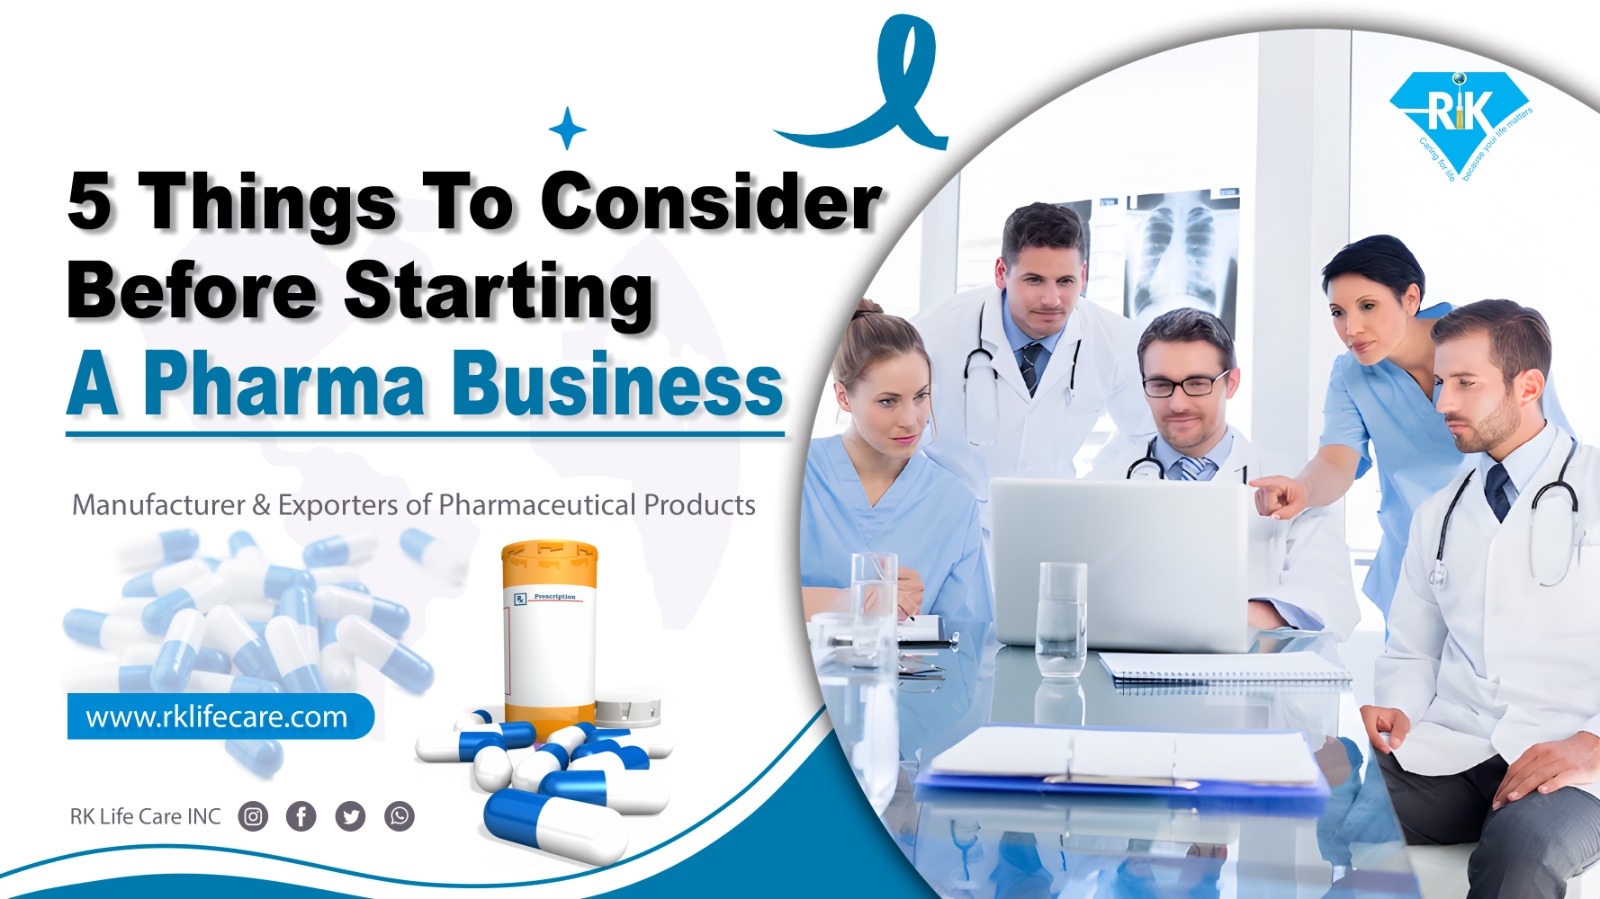 5 Things To Consider Before Starting A Pharma Business